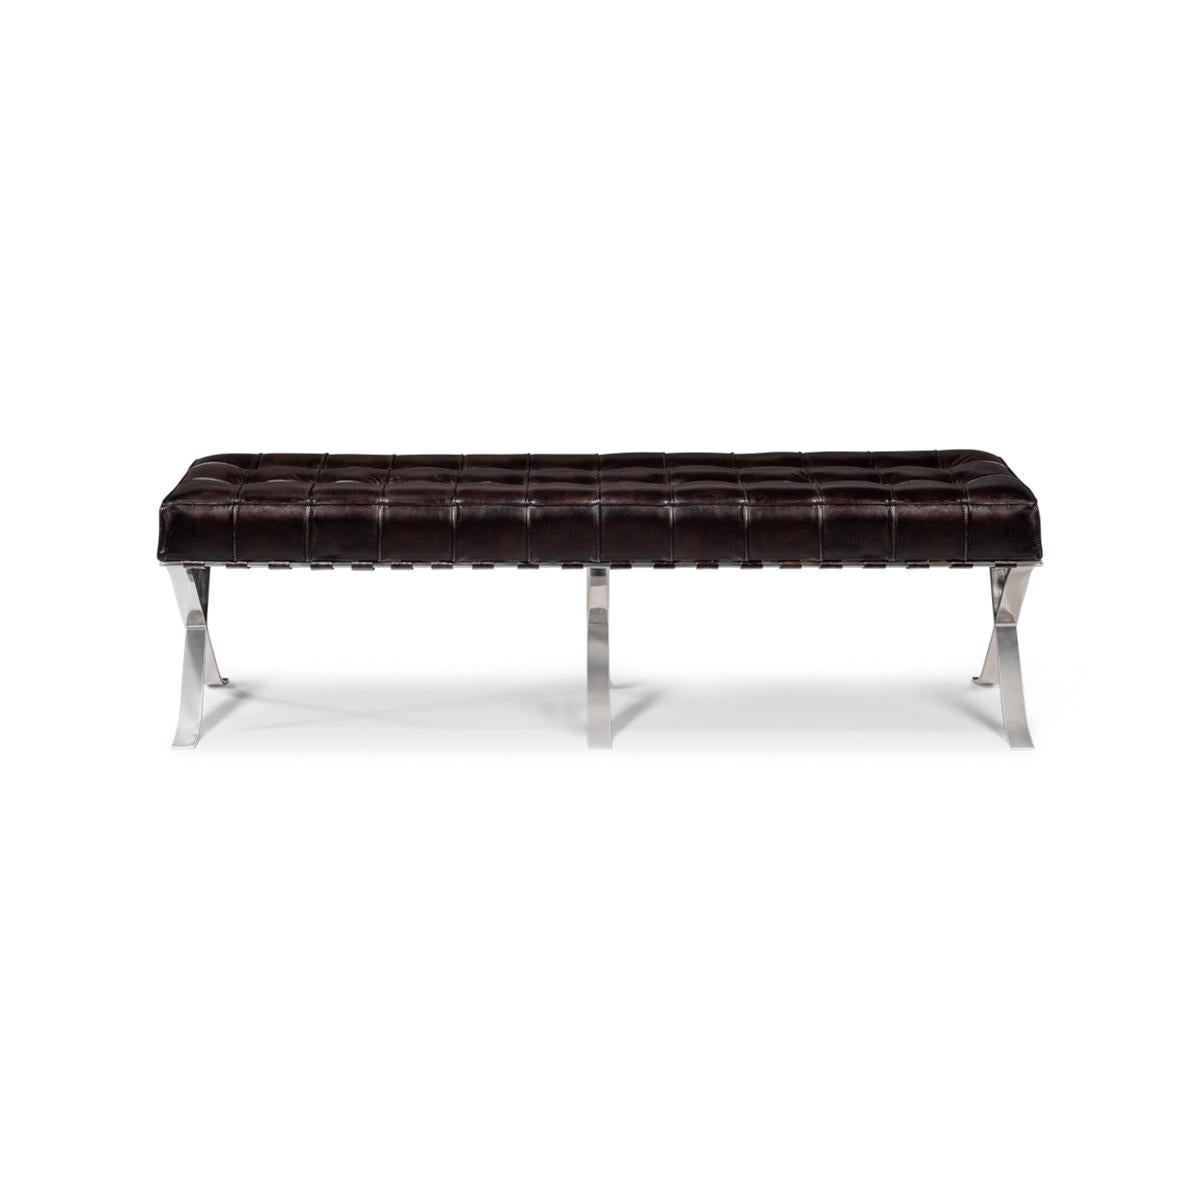 This sleek and modern bench combines luxury with a minimalist design, perfect for adding a touch of elegance to any interior space. The bench features a high-quality, deep brown tufted leather cushion that exudes comfort and sophistication. The